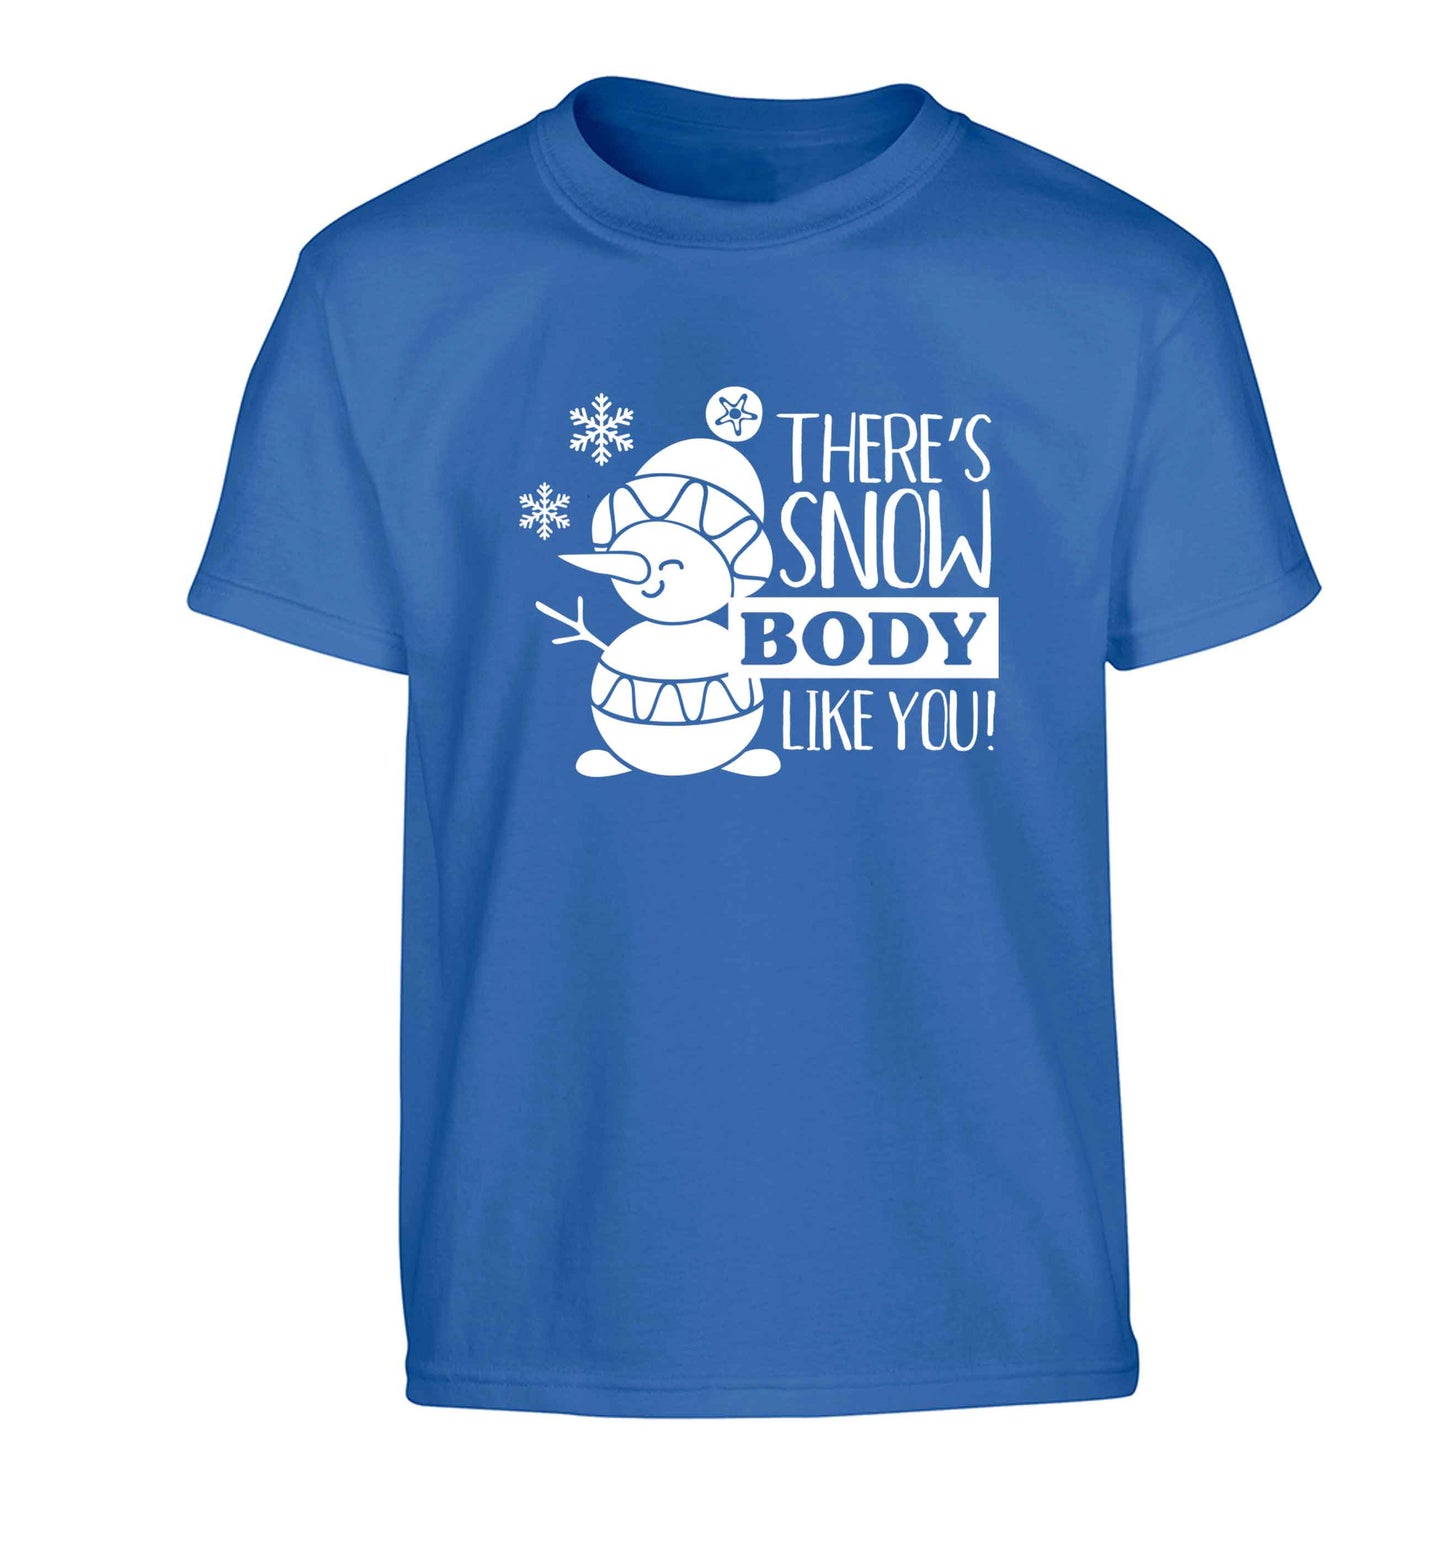 There's snow body like you Children's blue Tshirt 12-13 Years